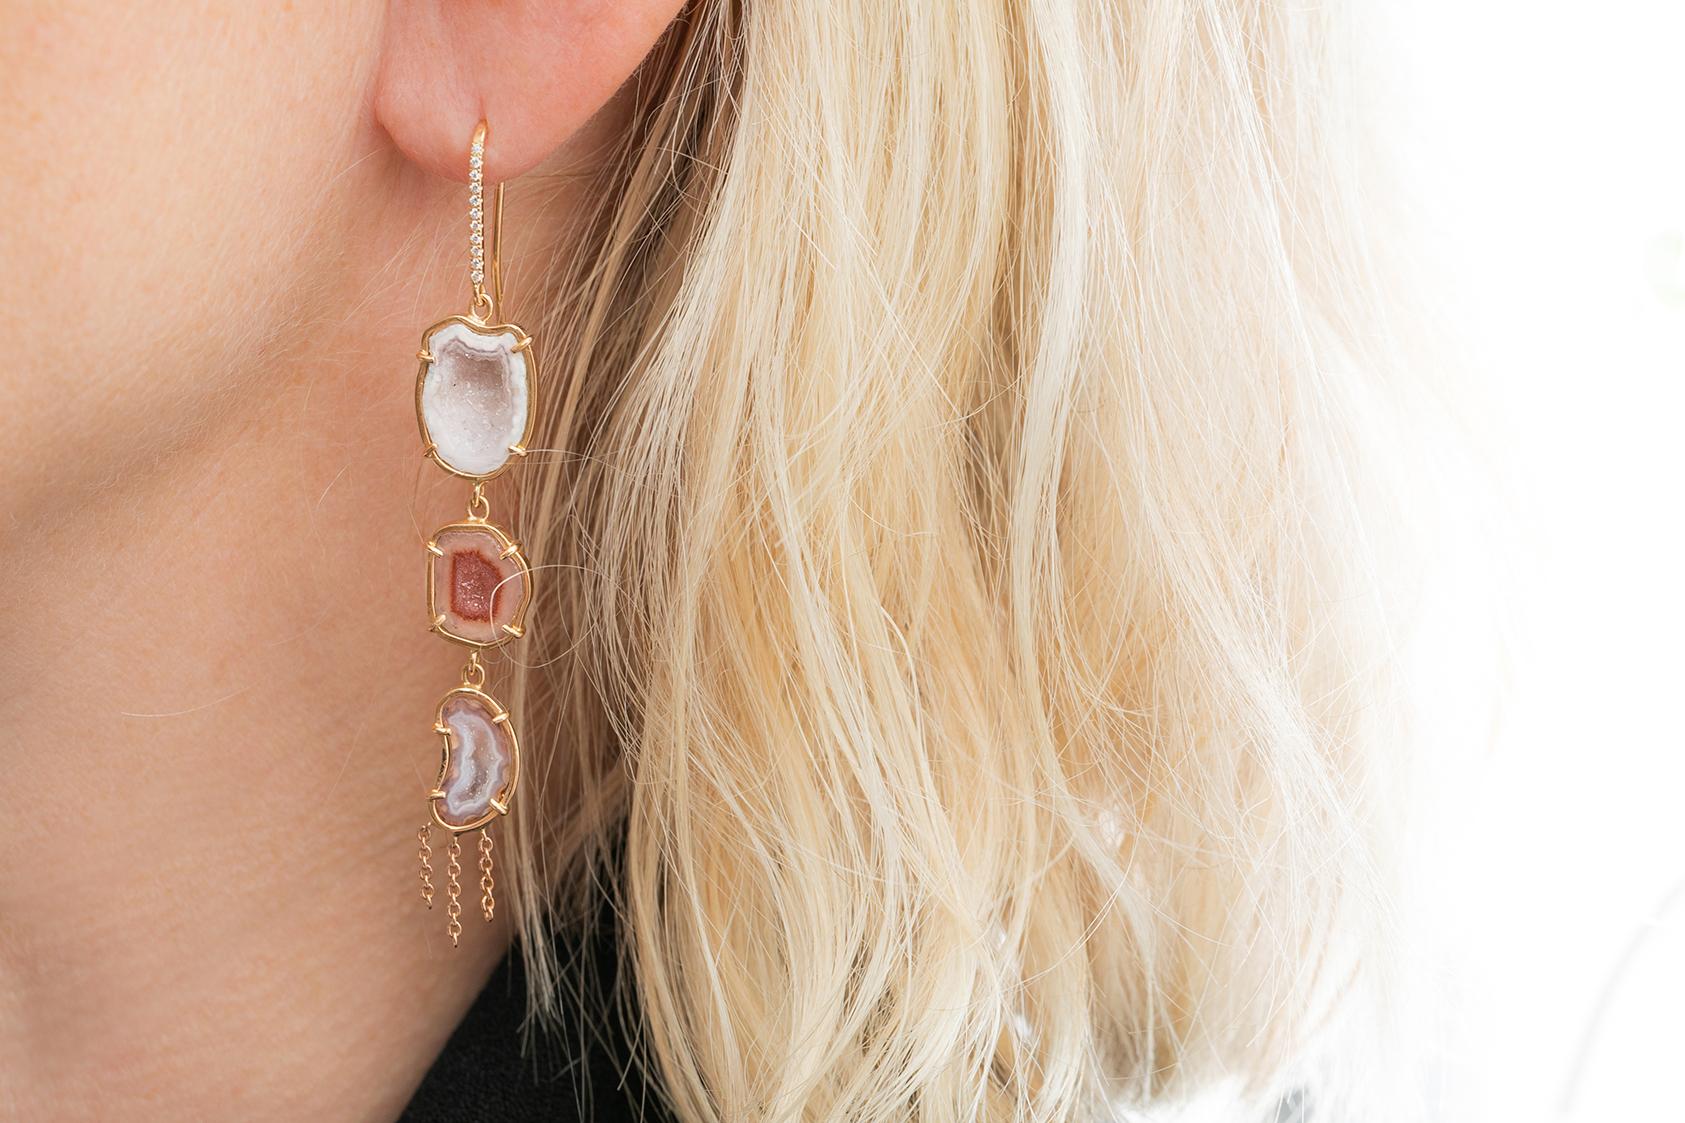 Earrings like a waterfall...
These beauties are set with 18 k rose gold and Light colored agate geodes.
With little Gvs diamonds ont he hook, they will complete your outfit, day or nights.
